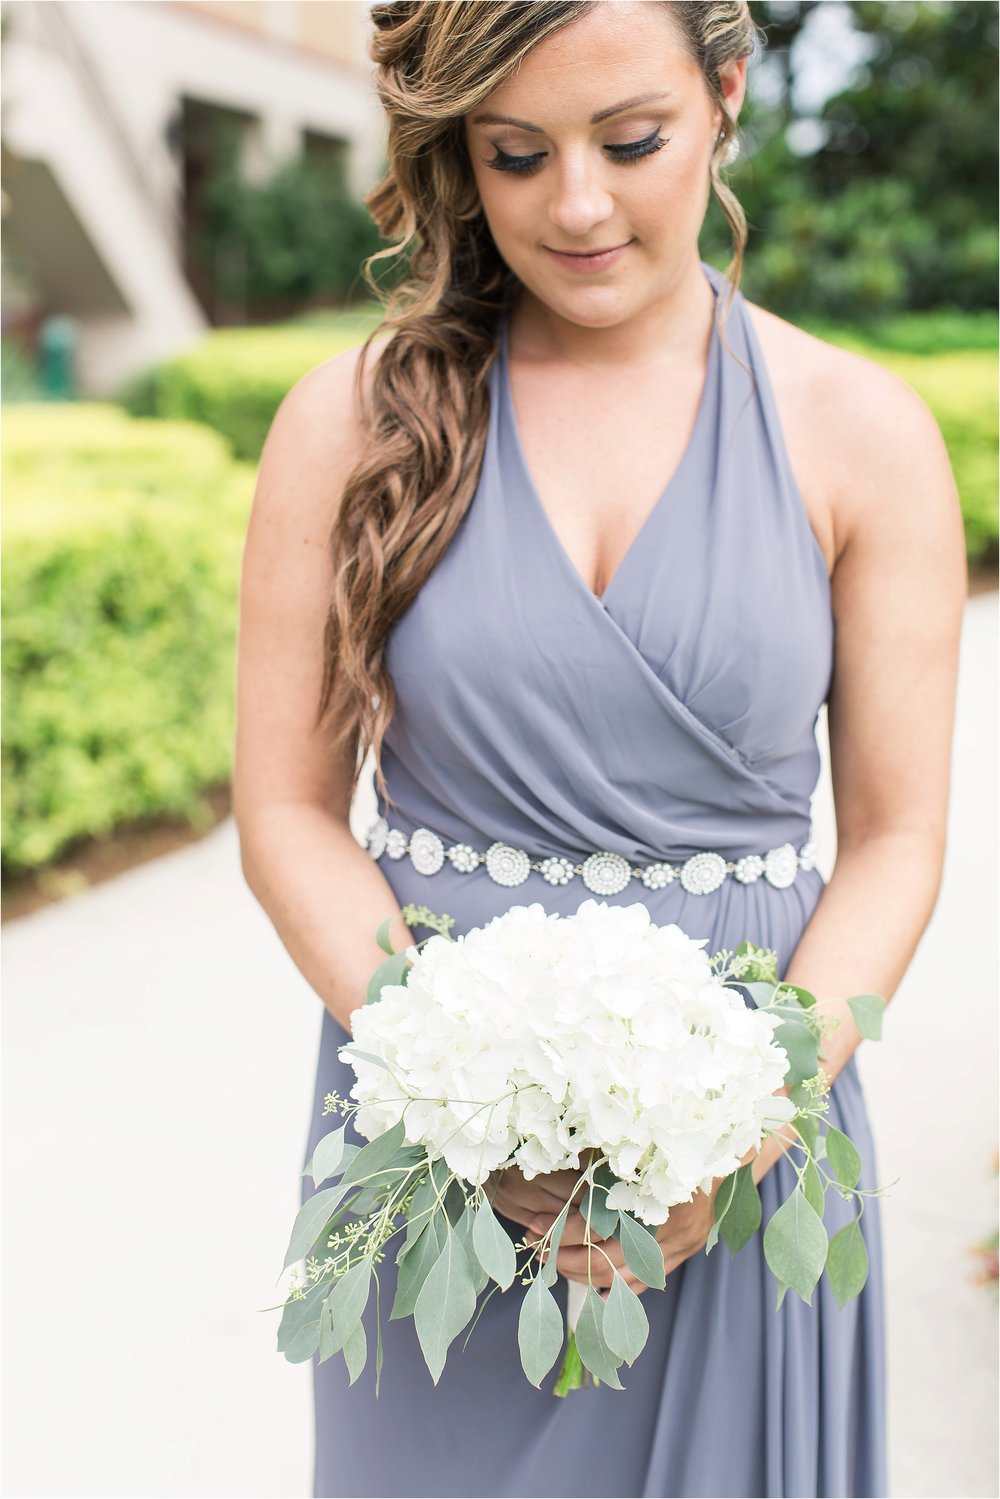 Grey bridesmaid gown and white bouquet at Wyndham Grand Resort at Bonnet Creek wedding by PSJ Photography 